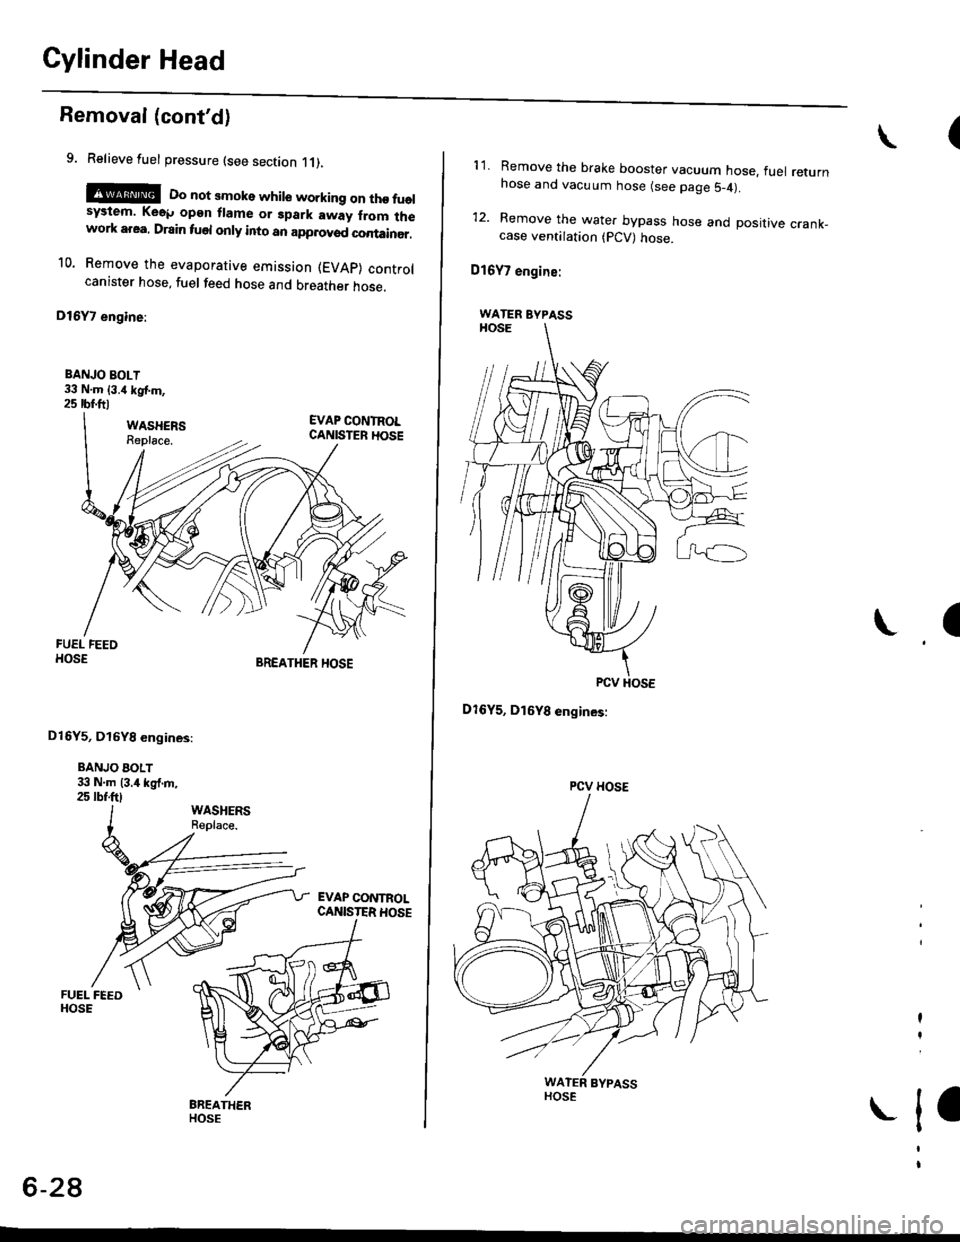 HONDA CIVIC 1996 6.G Workshop Manual Cylinder Head
Removal (contd)
9. Relieve fuel pressure (see section 11),
E@E Do not smoke while working on tho fuelsystem. Ke6p opgn flame or gpark away from lhework area, Drain fuel only into an app